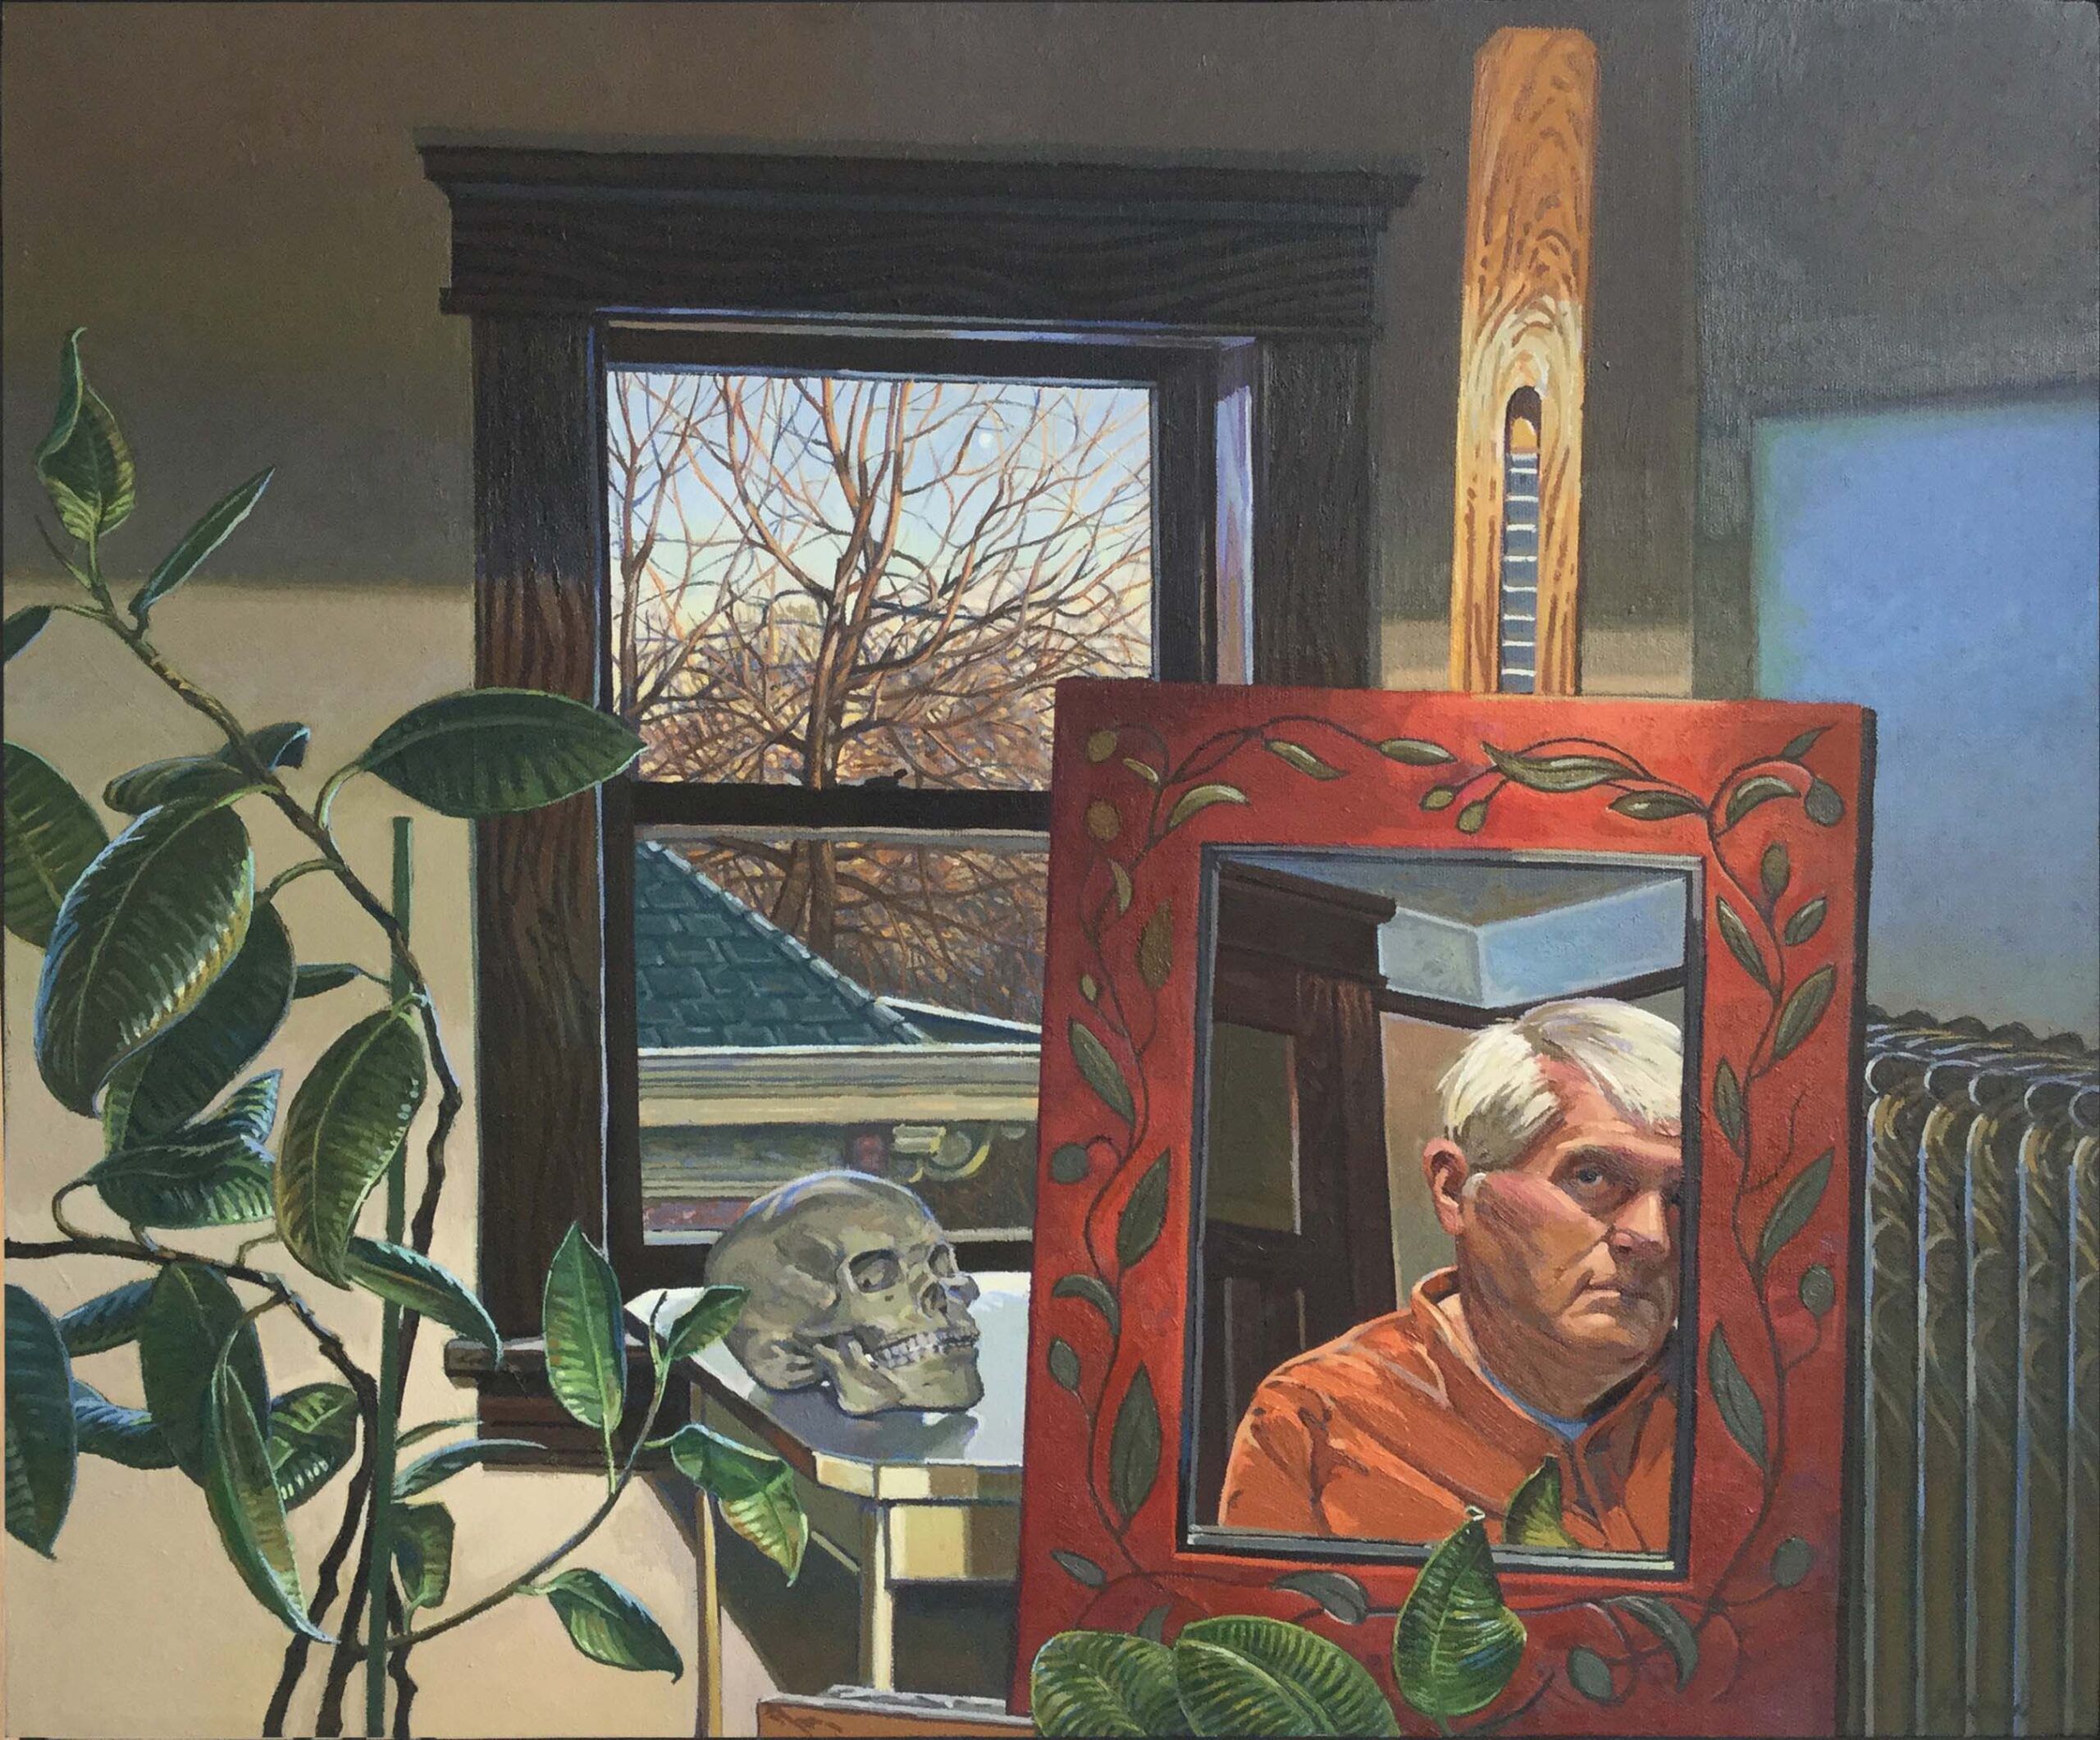 Midwest Paint Group and Invited Guests: Self-Portraits